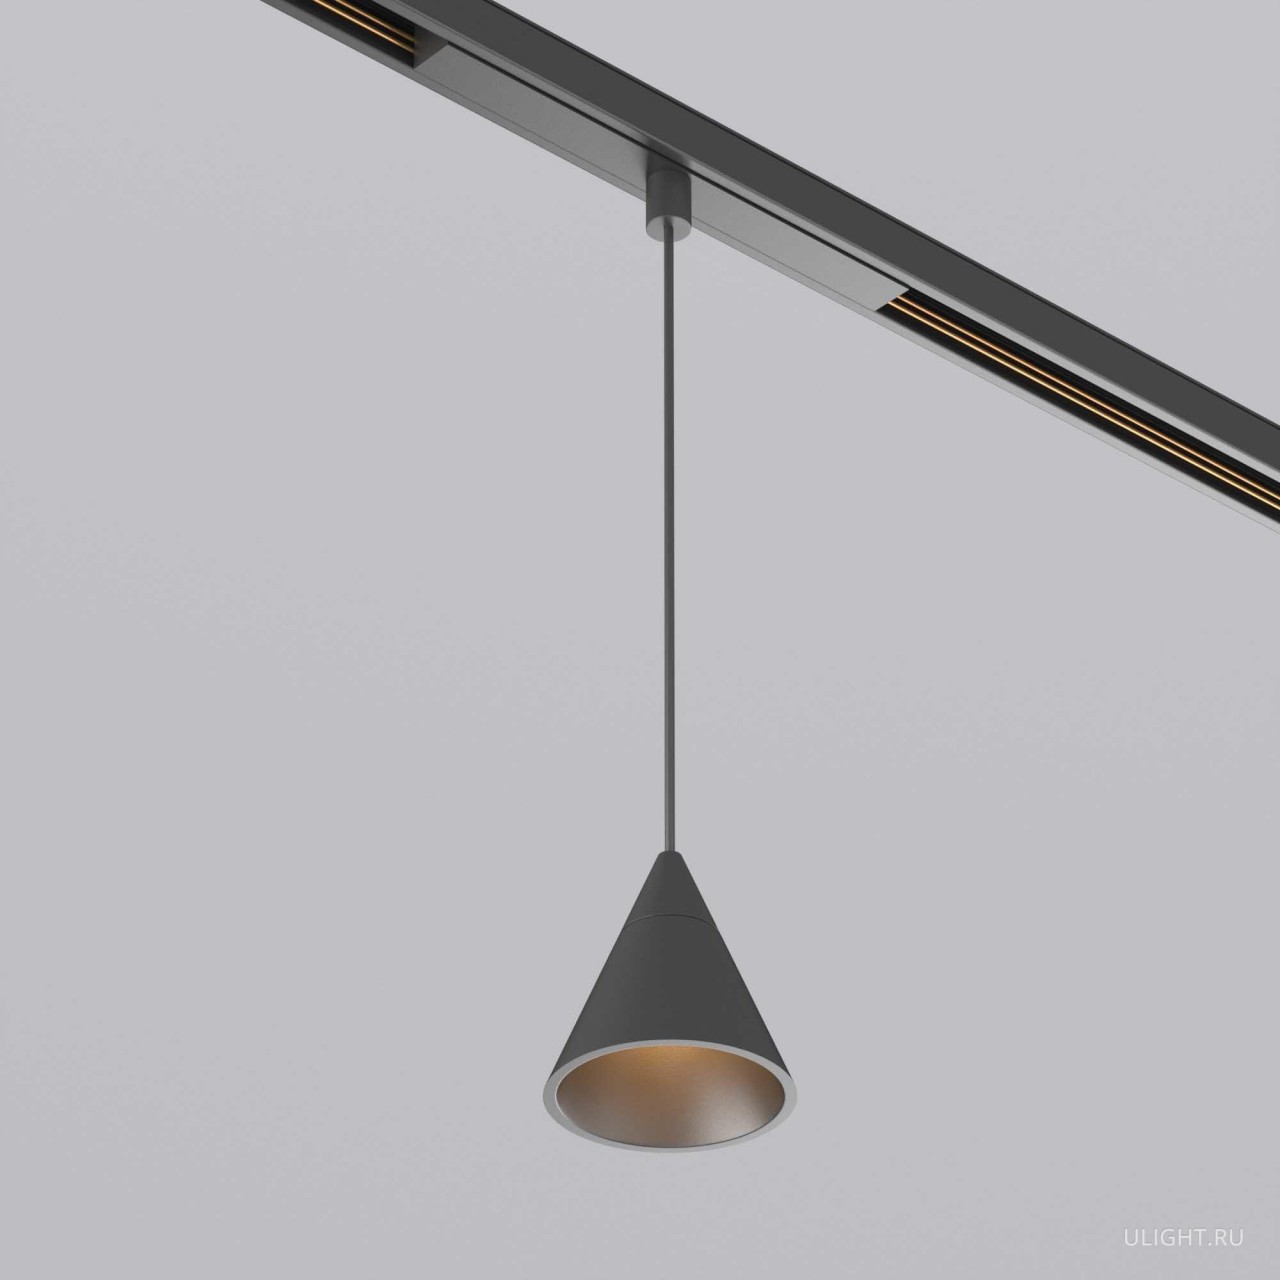 MAG-ORIENT-CONE-HANG-7W vray 2015 BKl.jpg